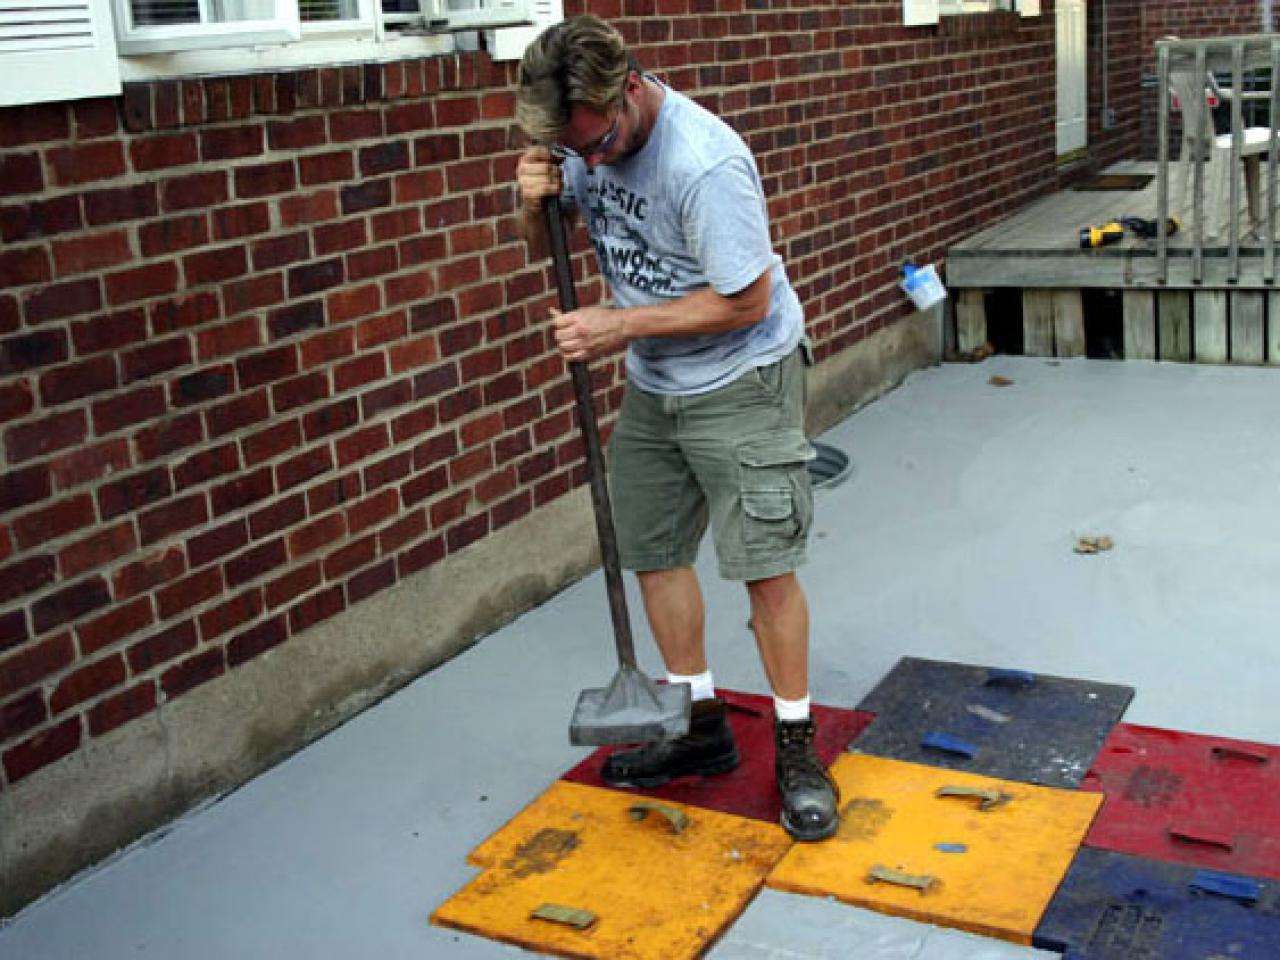 Enhance an Existing Patio With Concrete Stamping